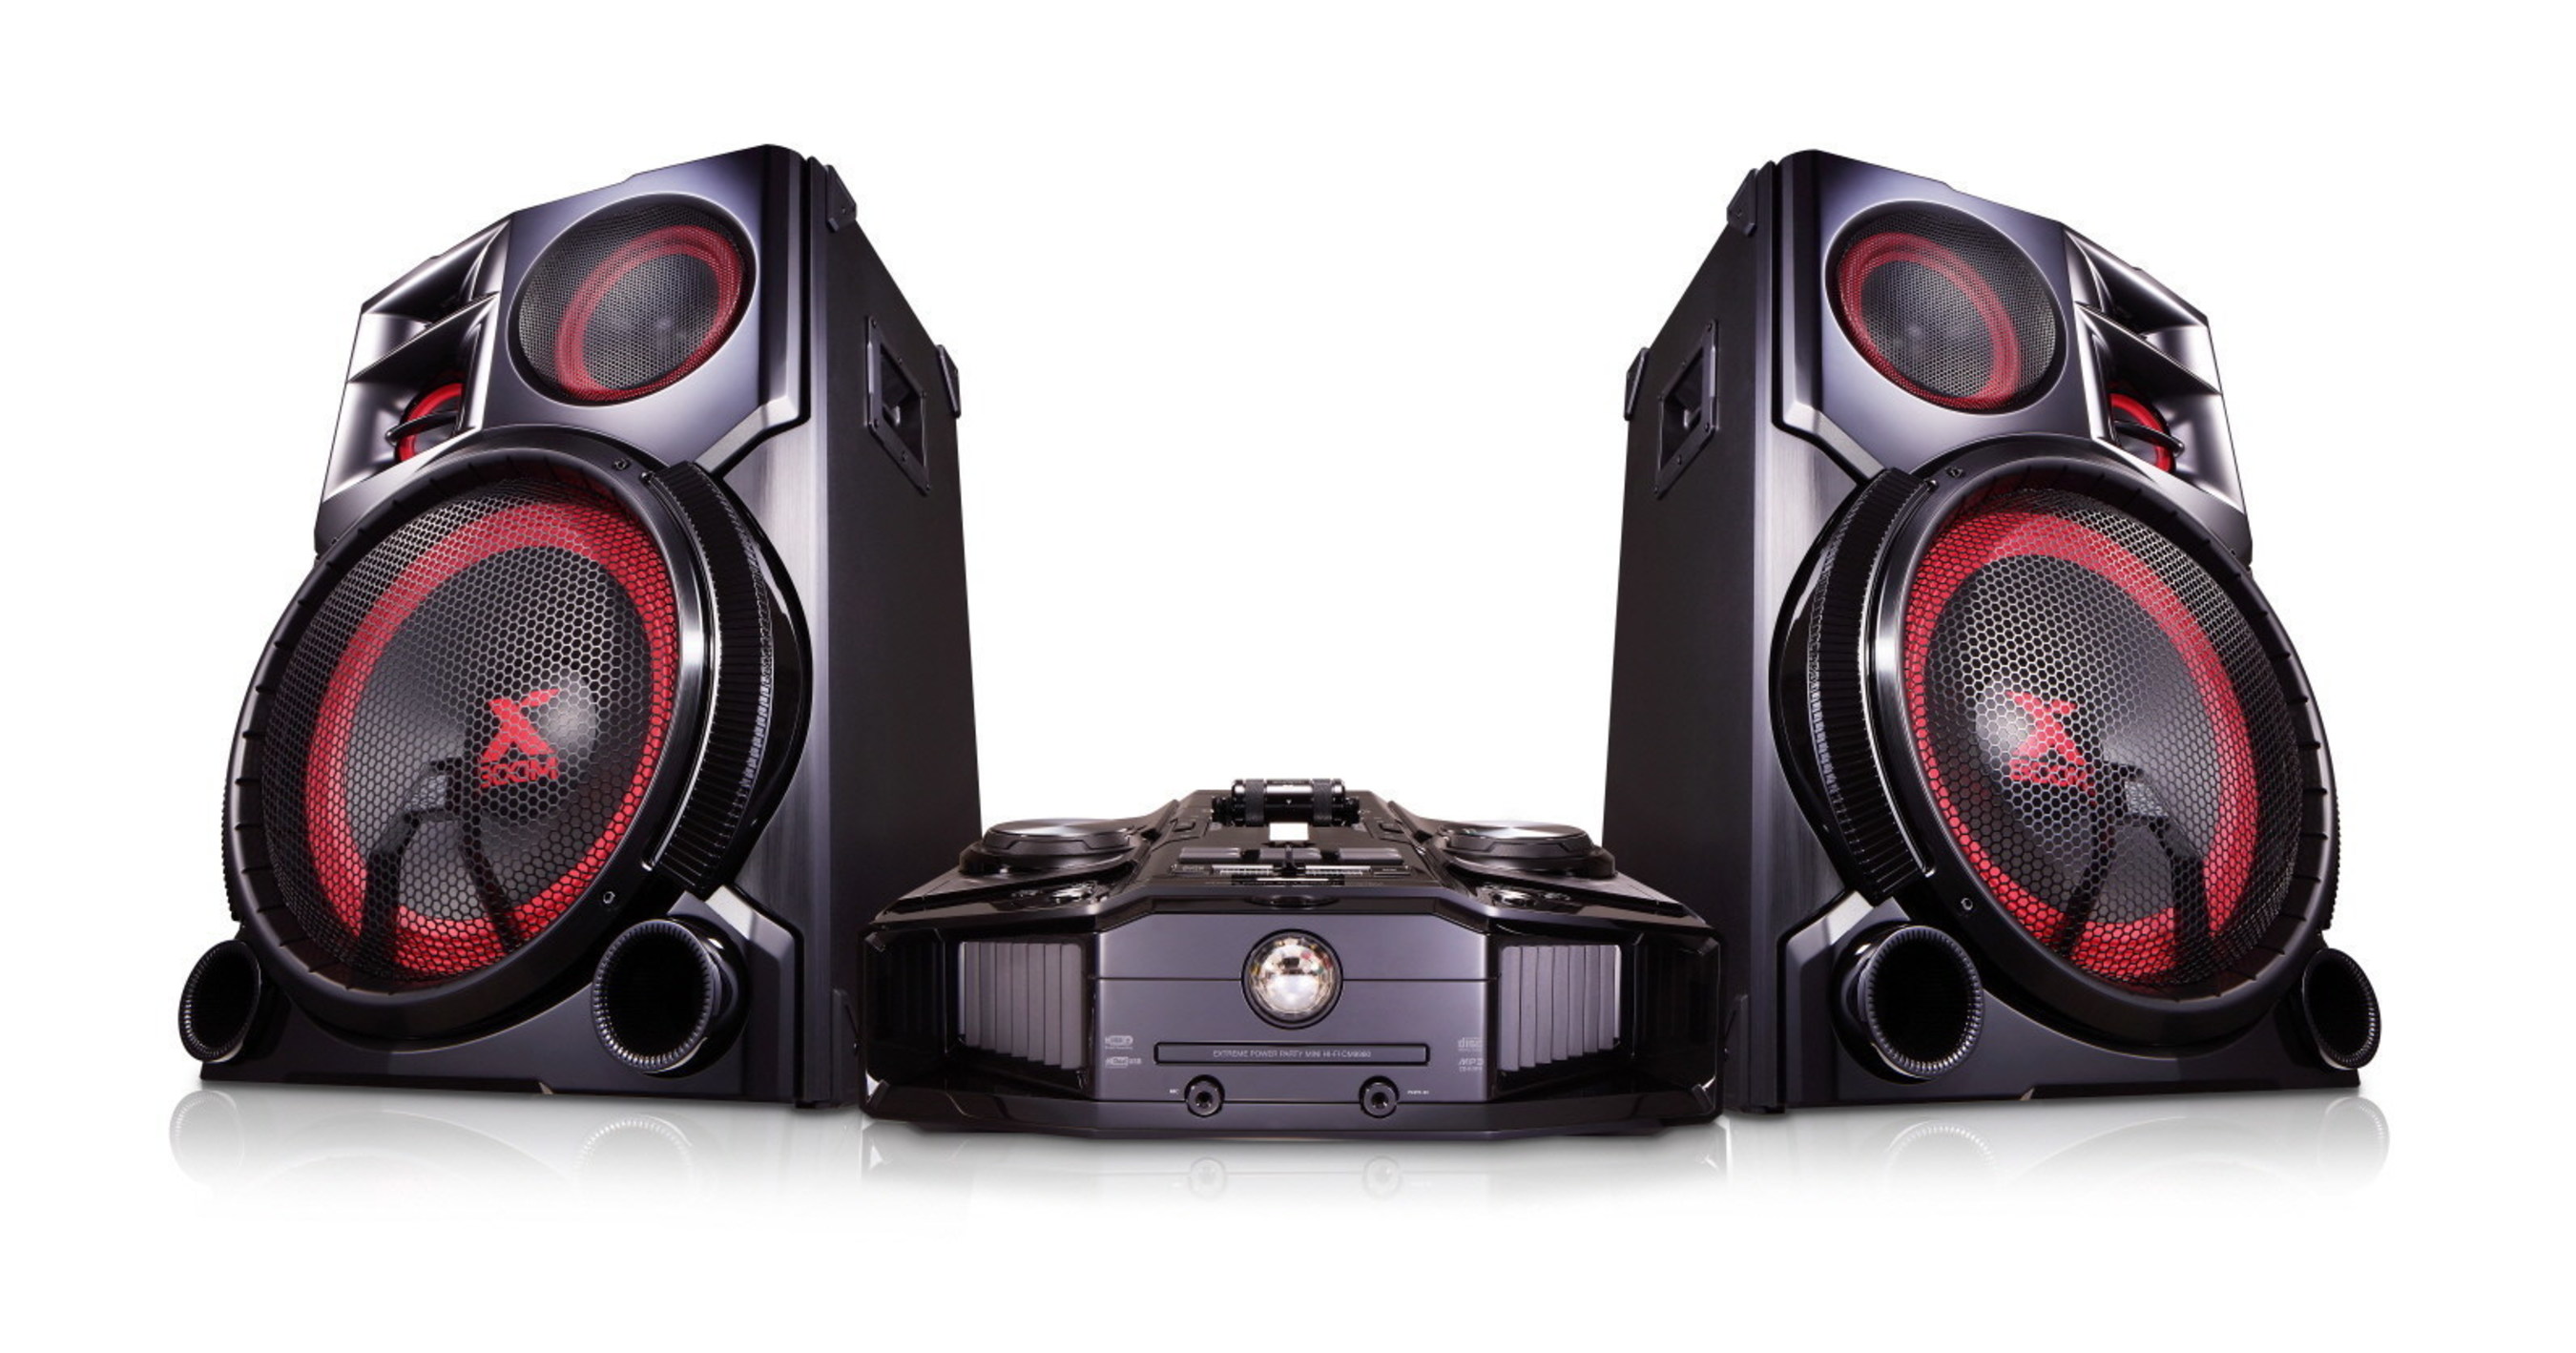 LG also announced plans to introduce the company's newest X-Boom audio systems, which come complete with a range of exciting new features for any party of gathering. The CM9960 is among the latest X-Boom audio systems LG will be unveiling  at CES 2016.